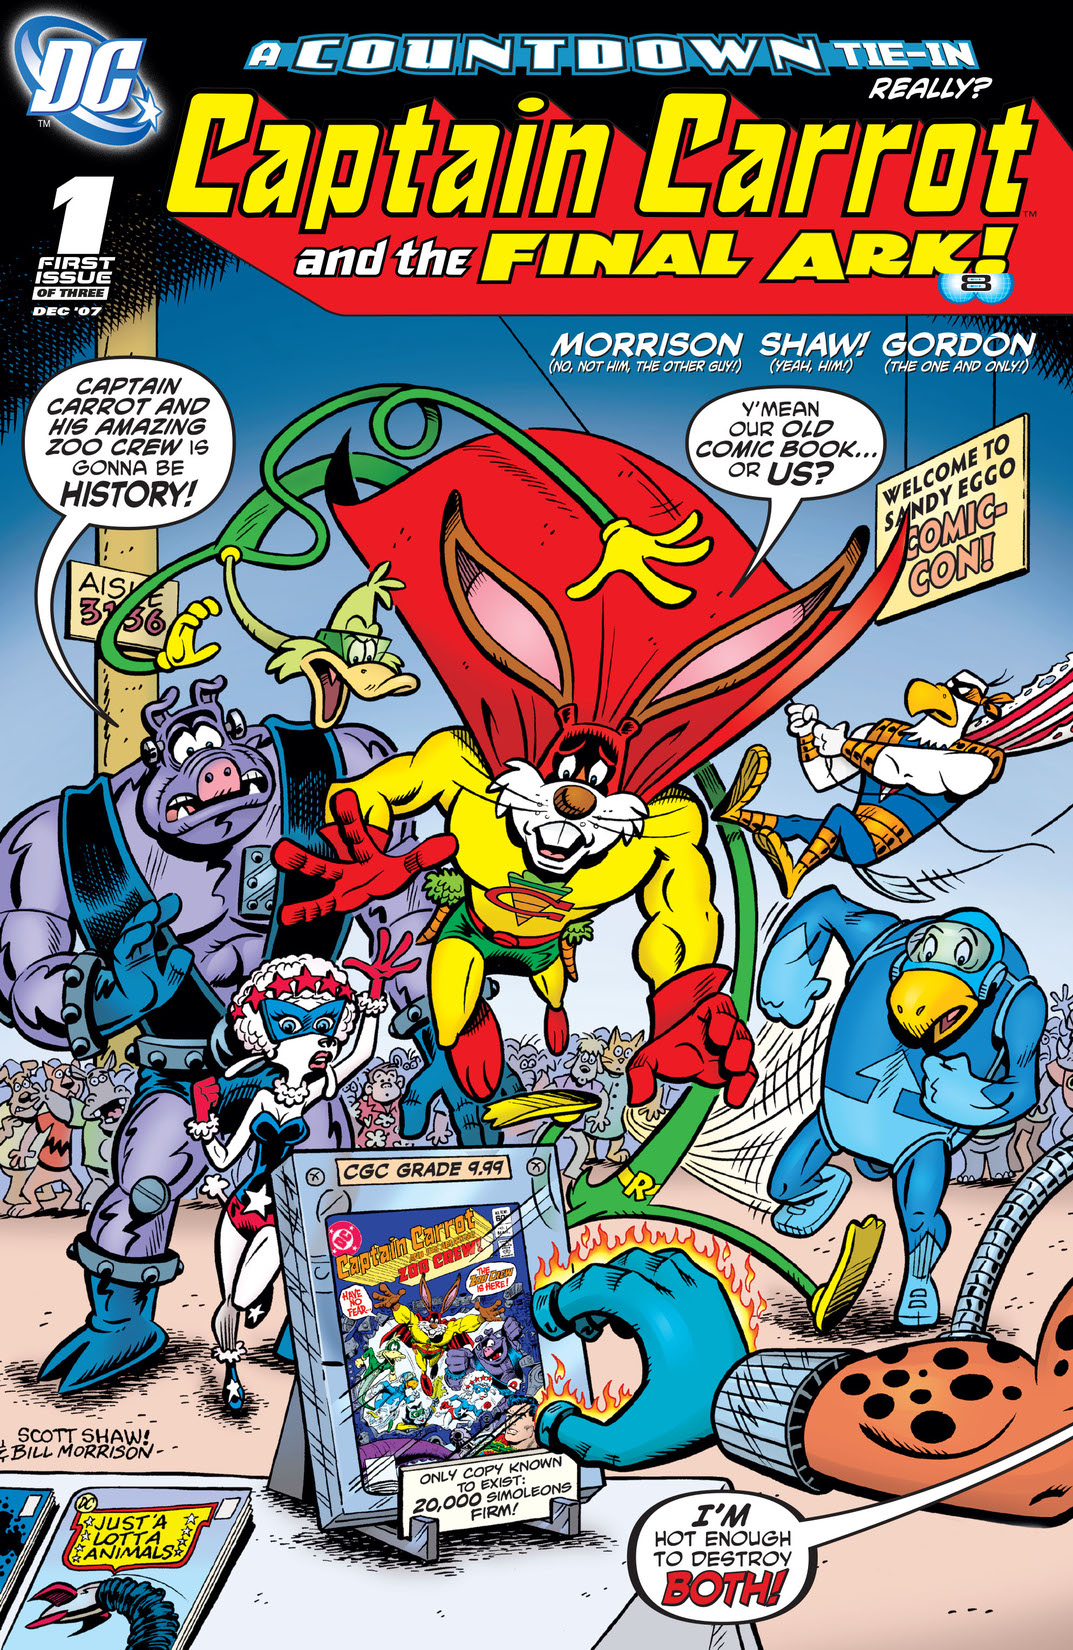 Captain Carrot and the Final Arc #1 preview images